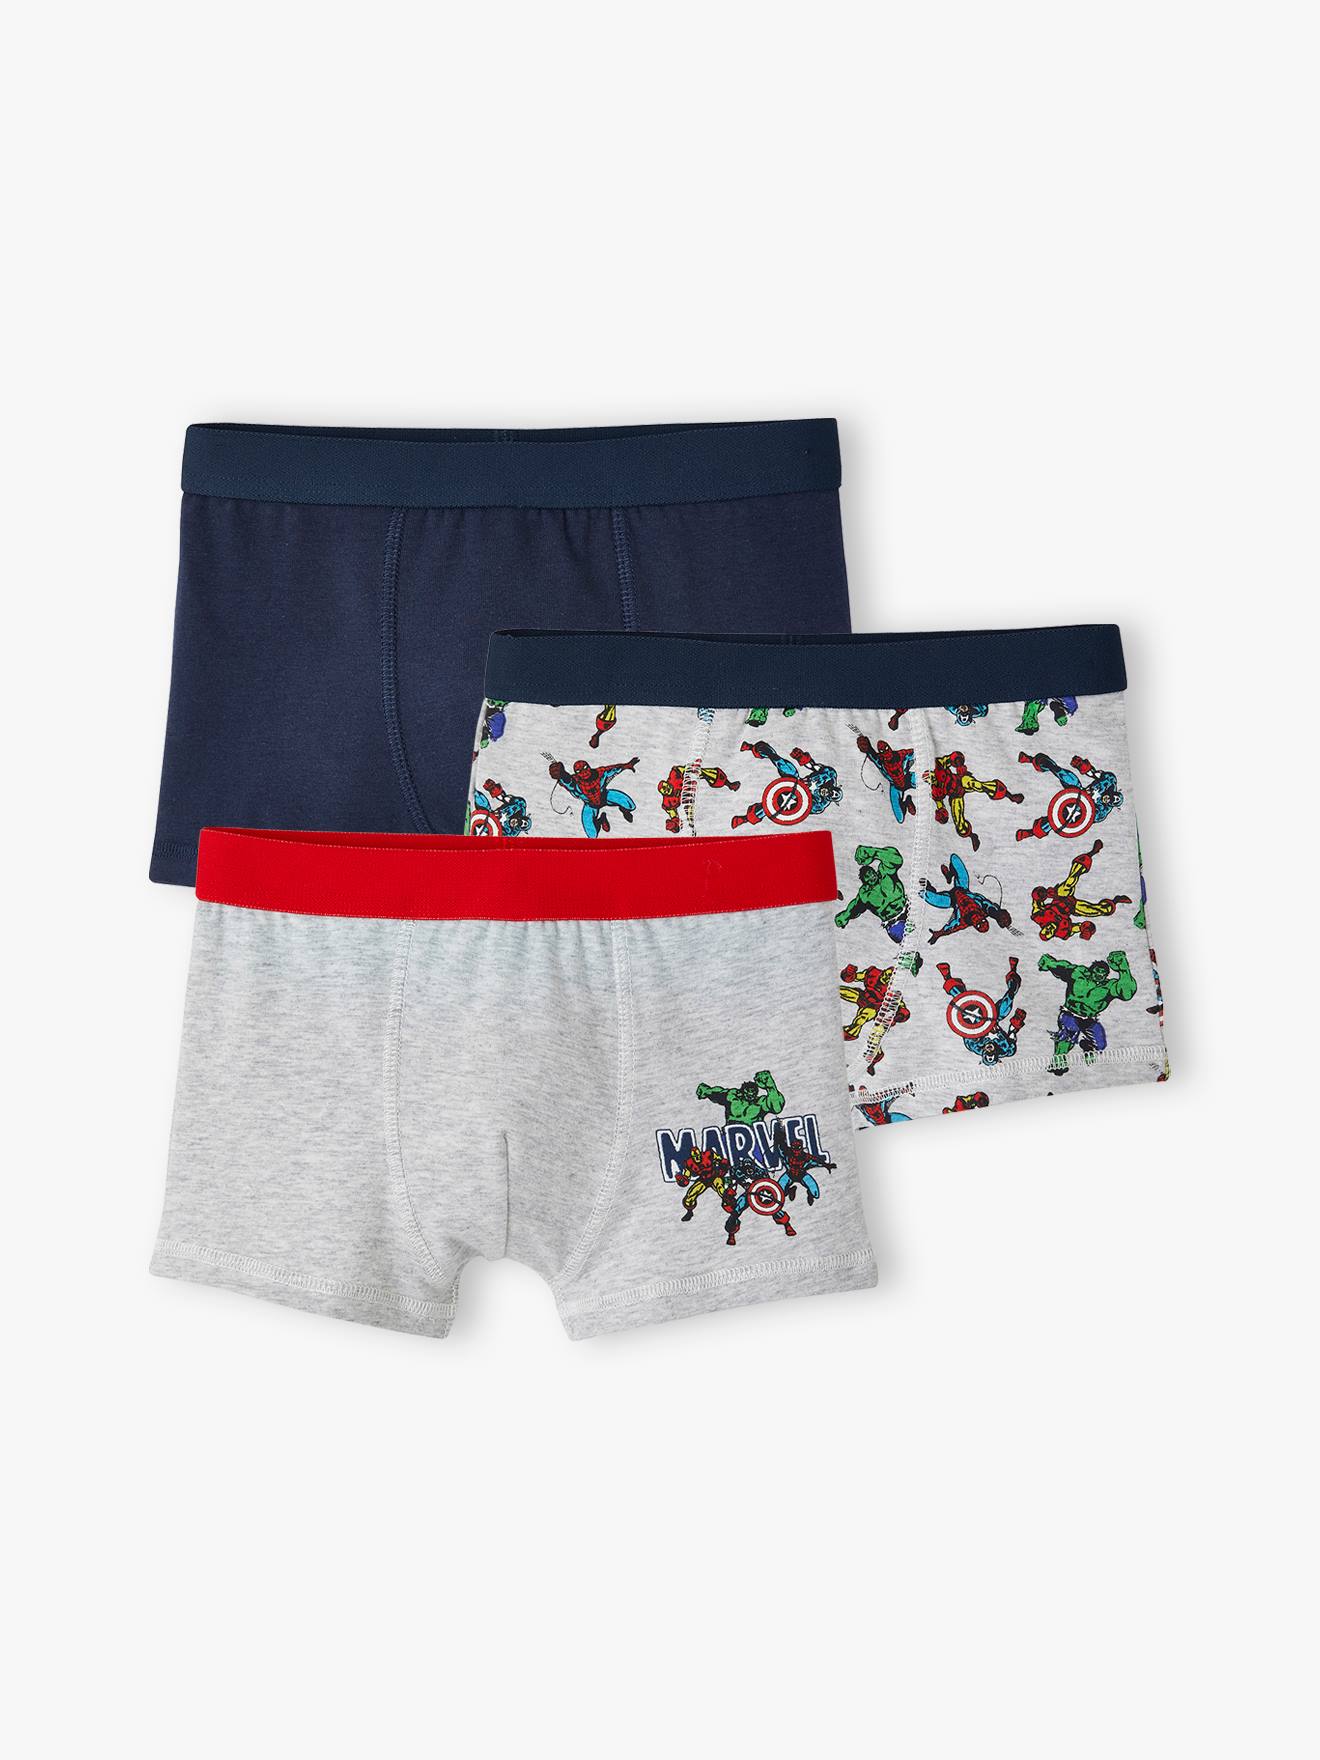 Pack of 3 Avengers Boxers for Boys, by Marvel® - navy blue, Boys